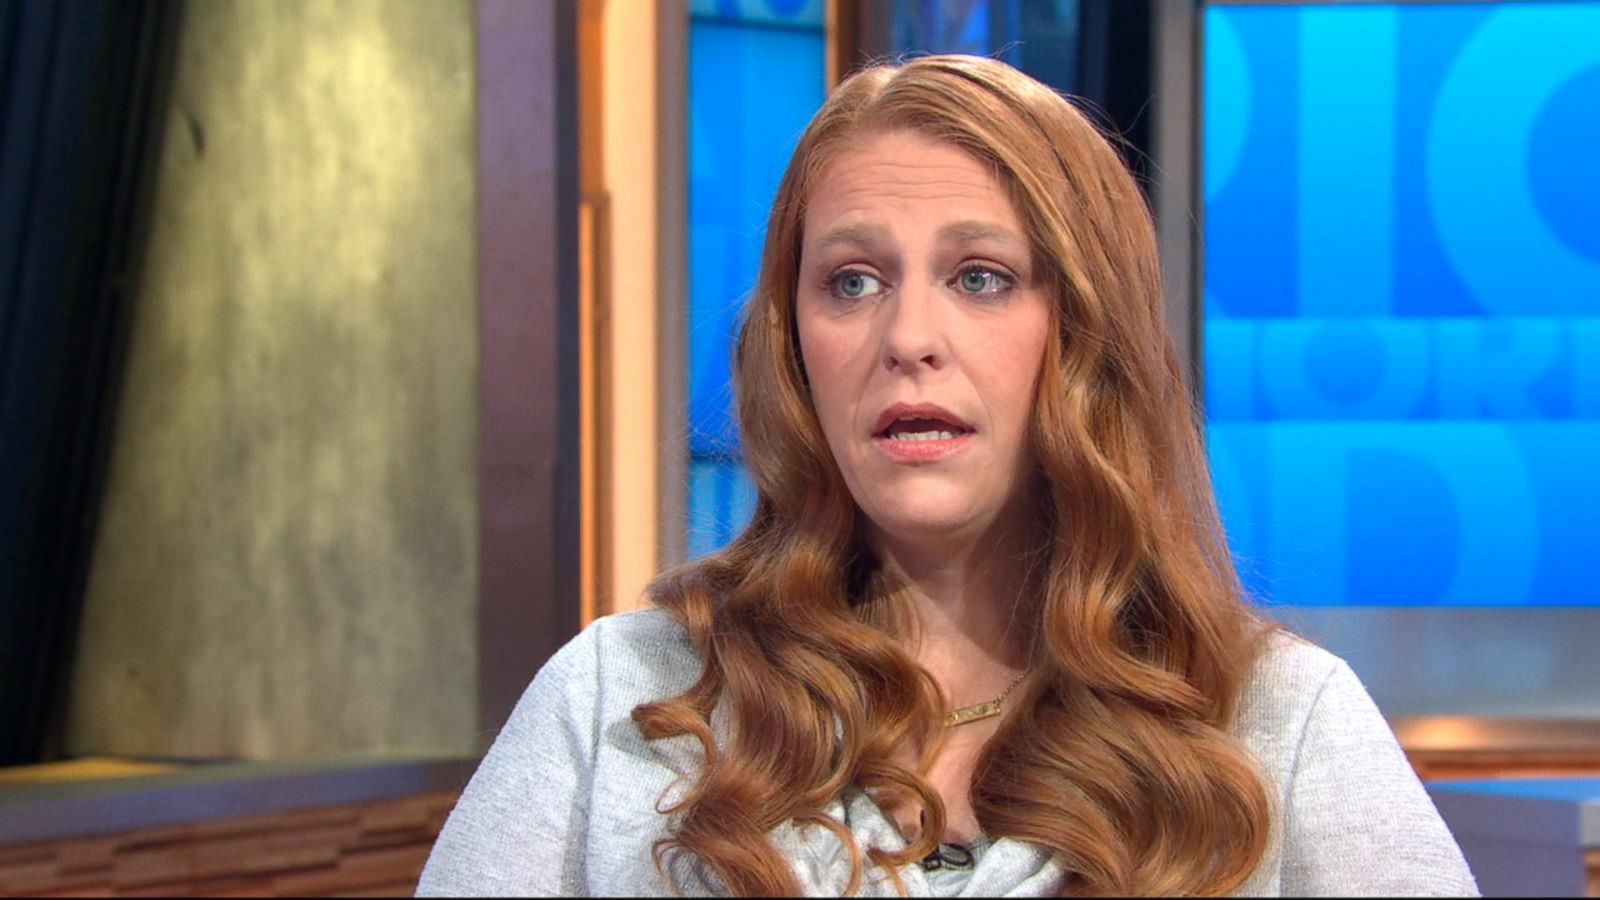 Aunt of 13 siblings allegedly held captive reacts to their release ...